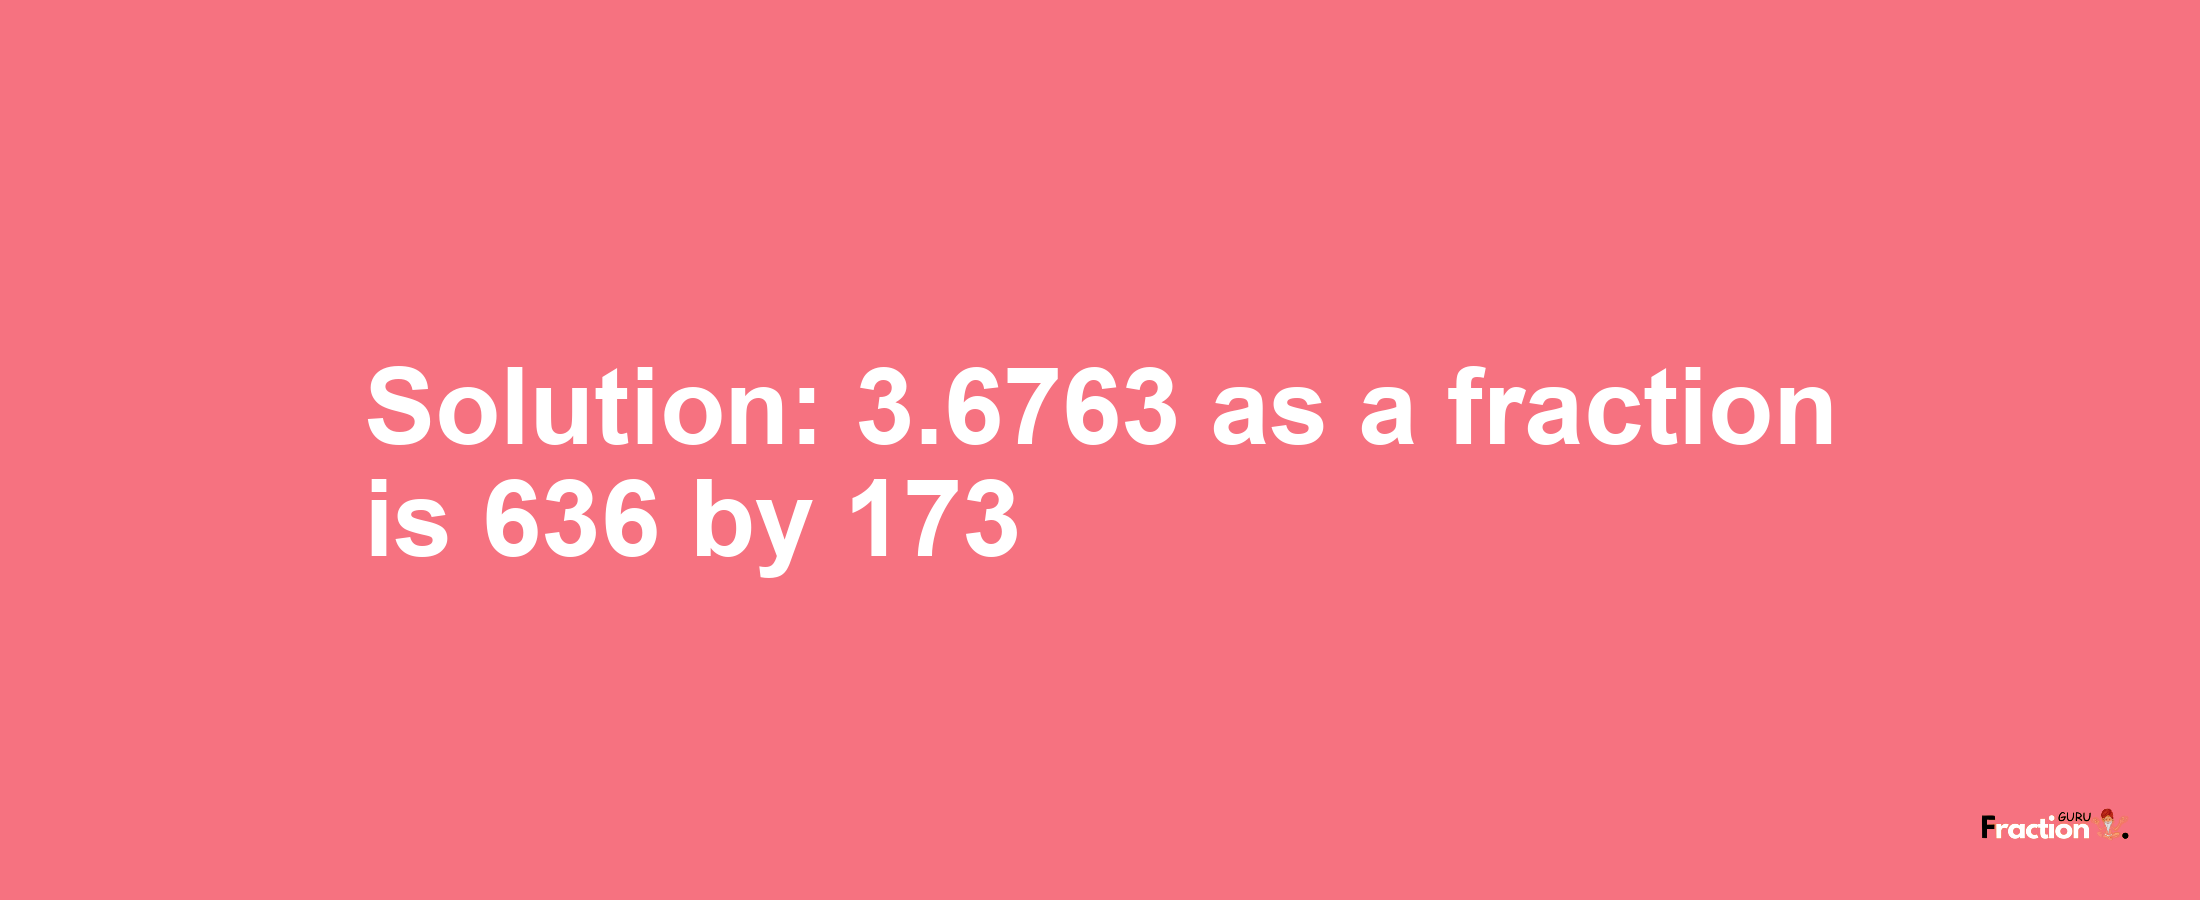 Solution:3.6763 as a fraction is 636/173